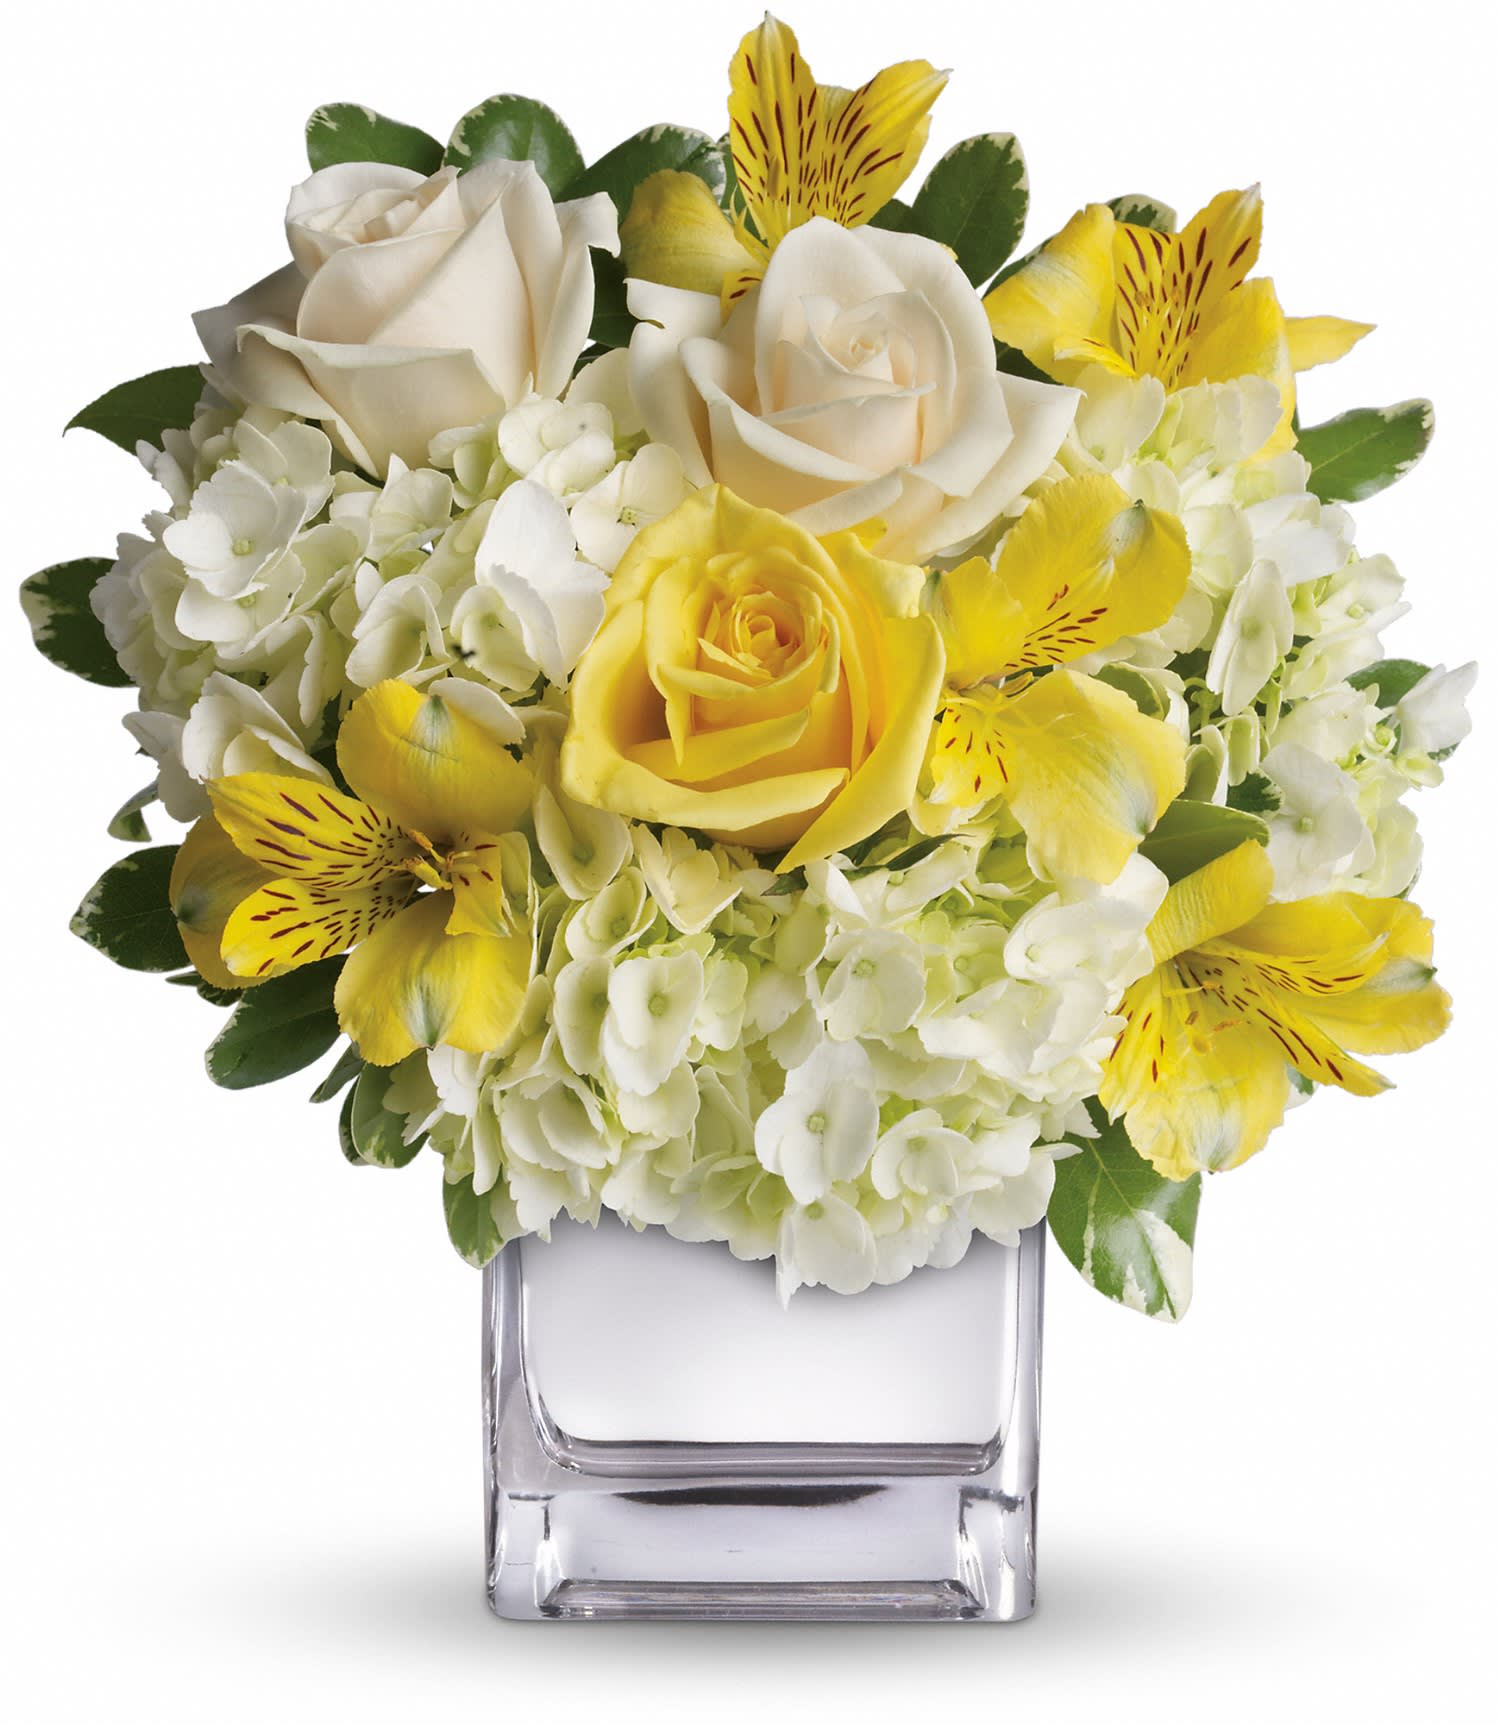 Sweetest Sunrise Bouquet - This sparkling array of sunny favorites in a silver cube vase will be the star of any room. It's a sweet gift she'll love to receive - and you'll be proud to give. Sweet price, too.